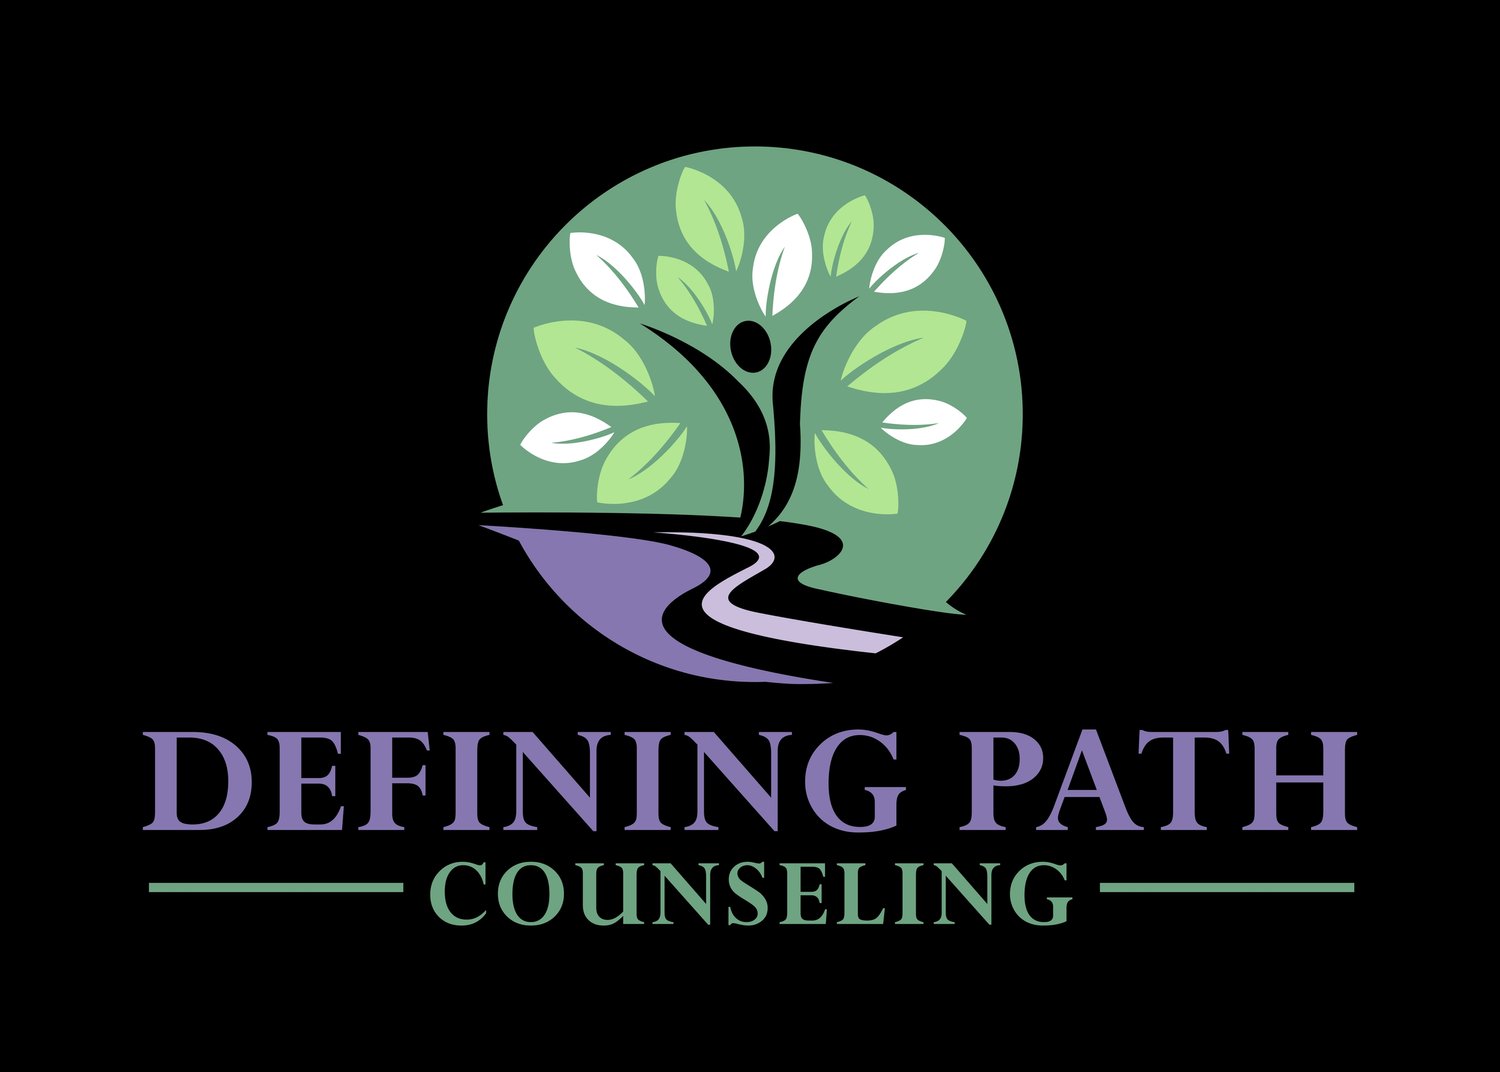 Defining Path Counseling